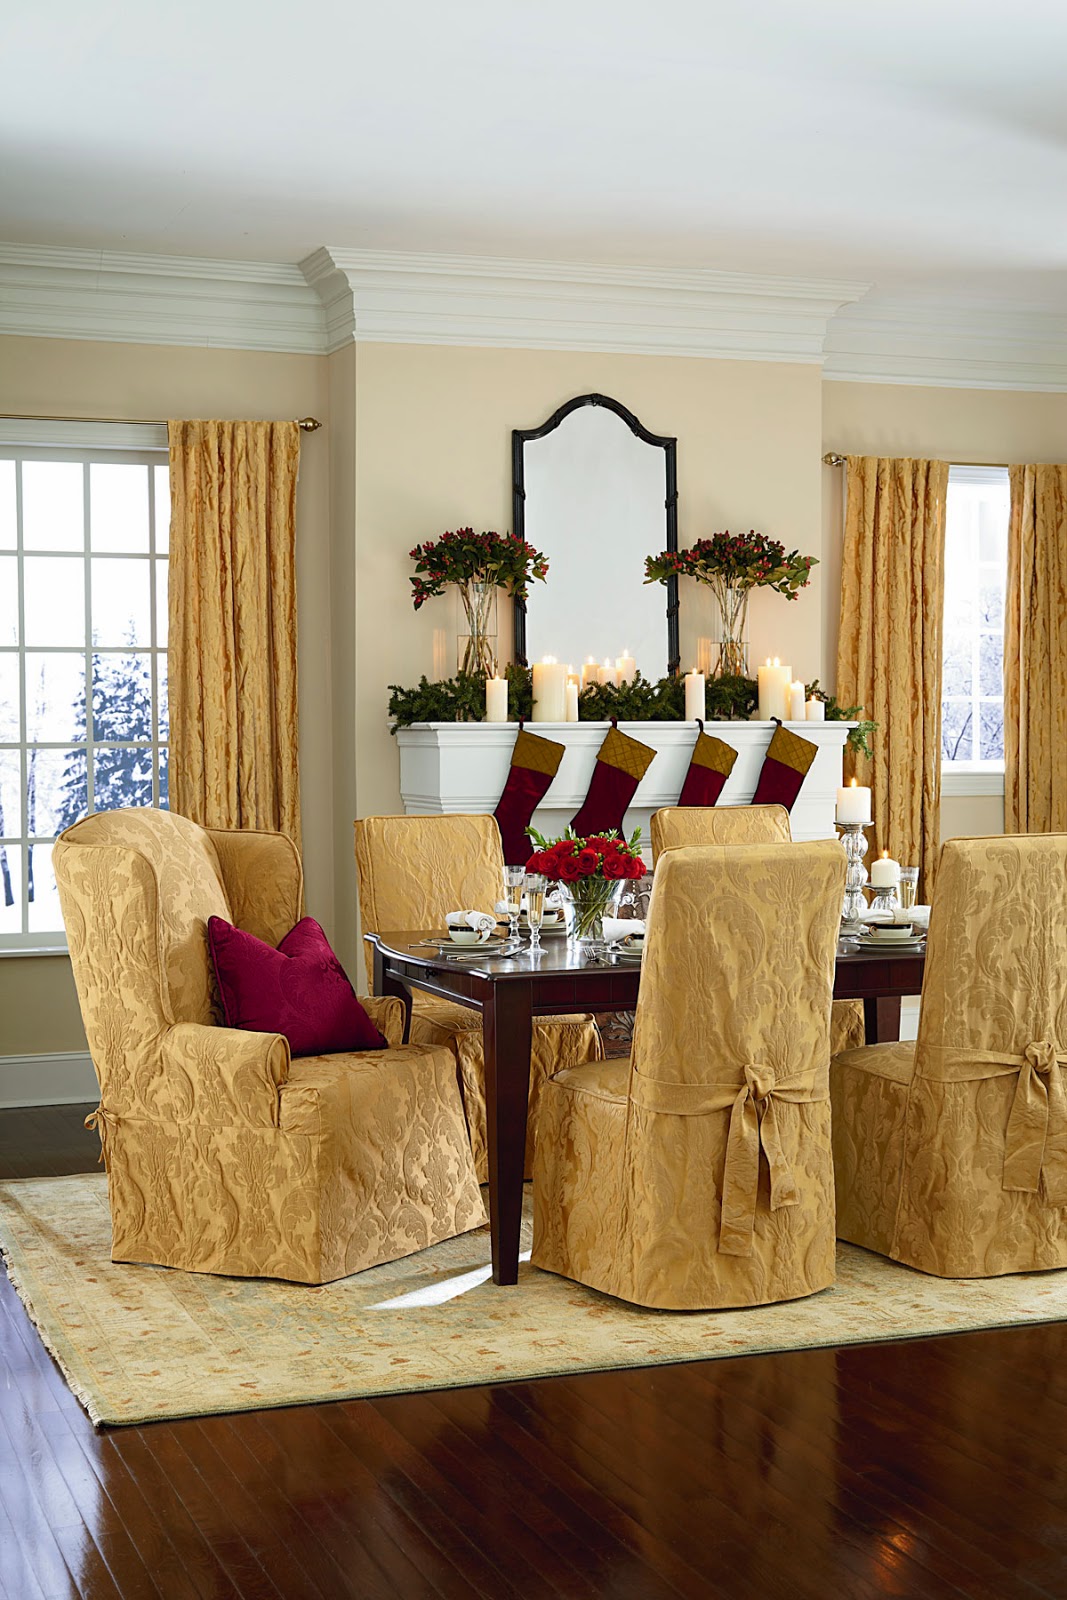 Sure Fit Slipcovers Tis The Season To Entertain In Style